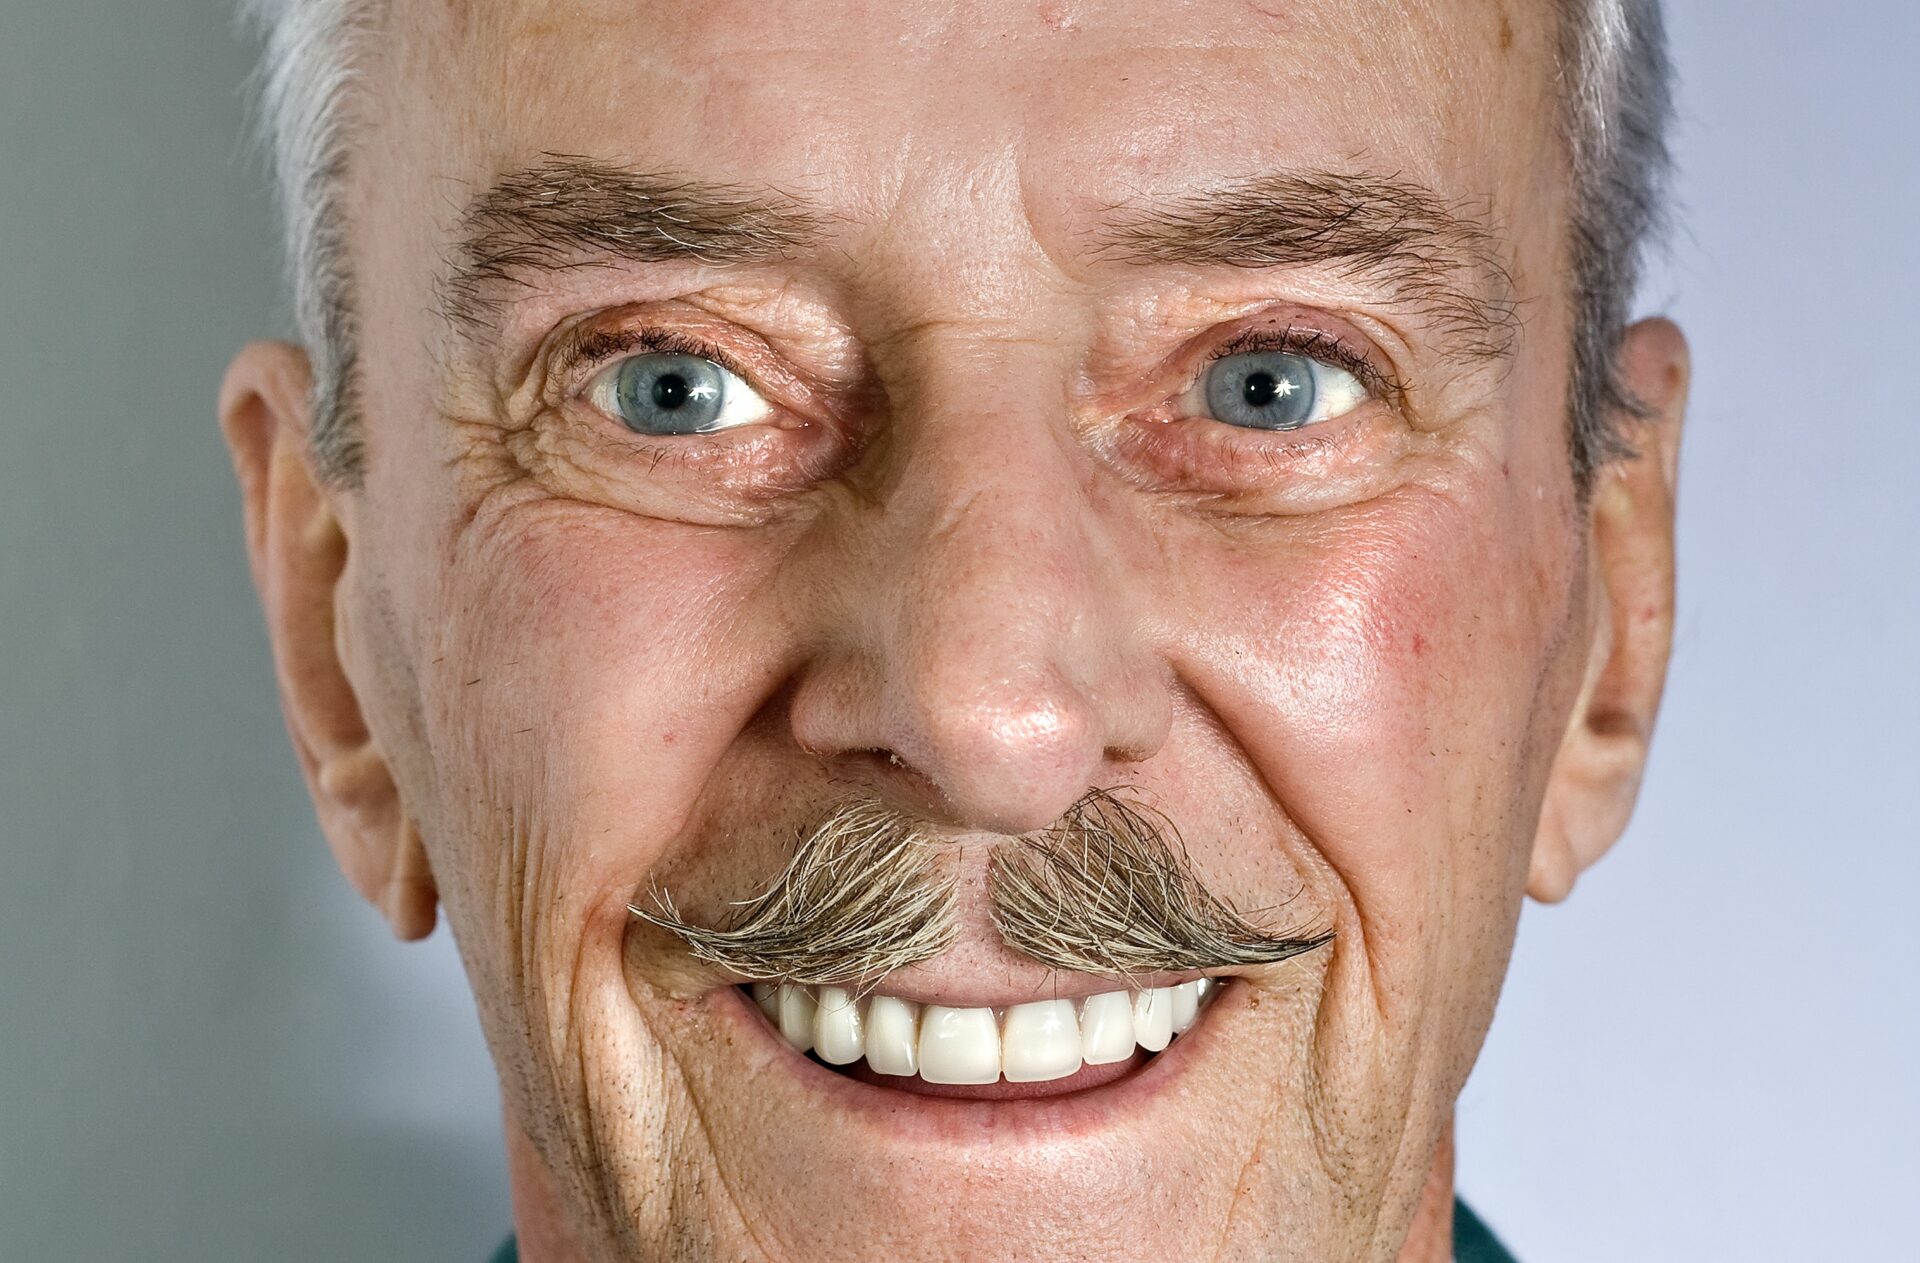 Smiling elderly man with a mustache